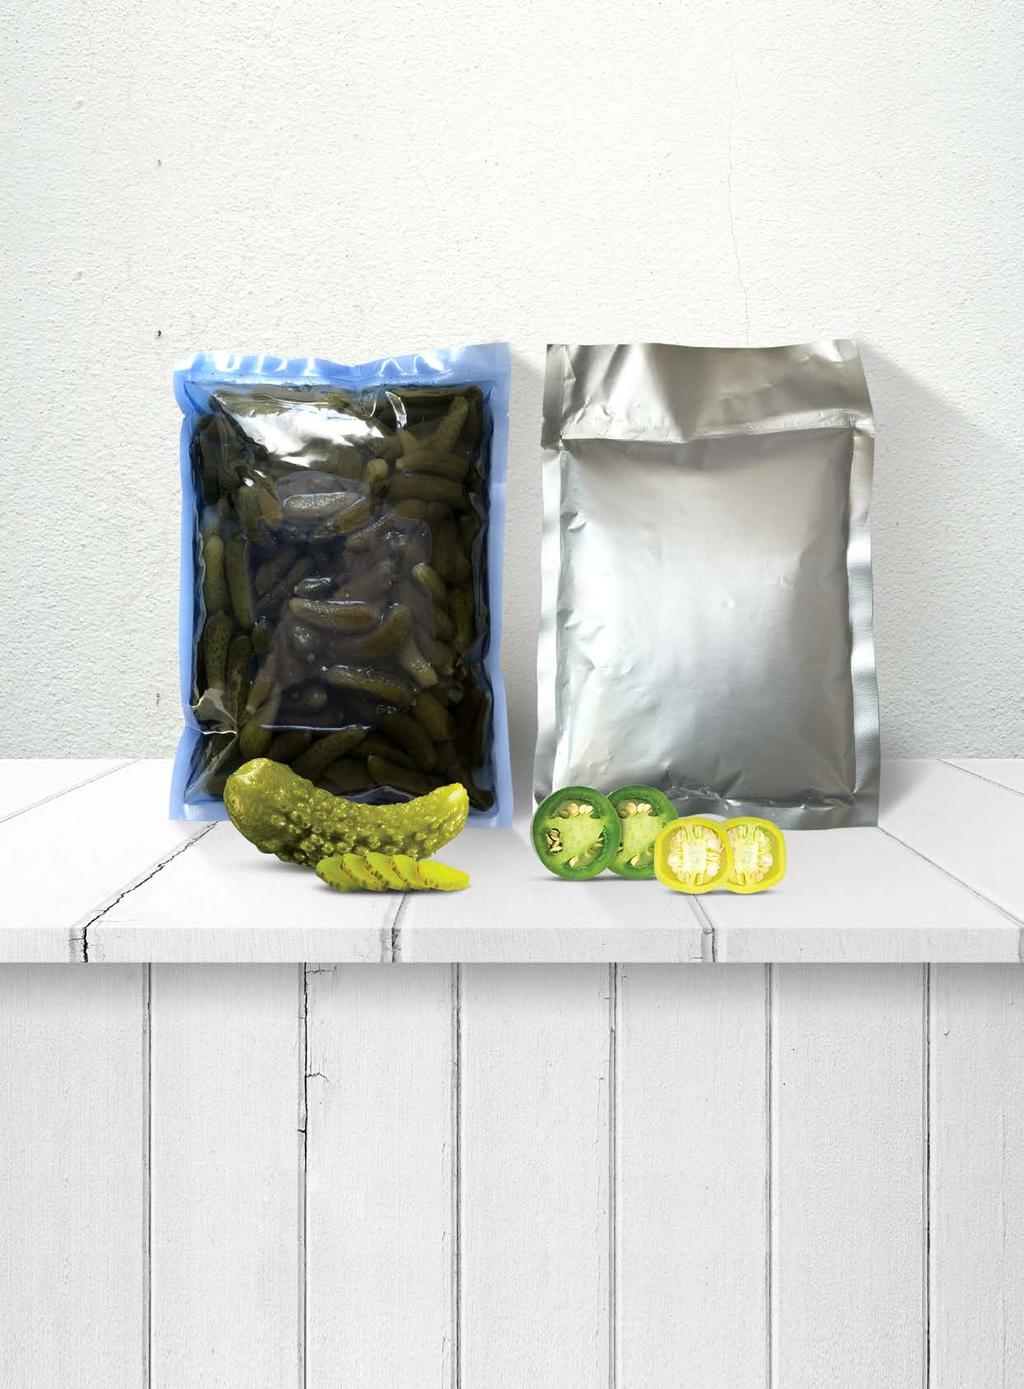 POUCHES & CANS SOUR SLICED GHERKINS IN POUCHES IN CANS I o hk... oud h!